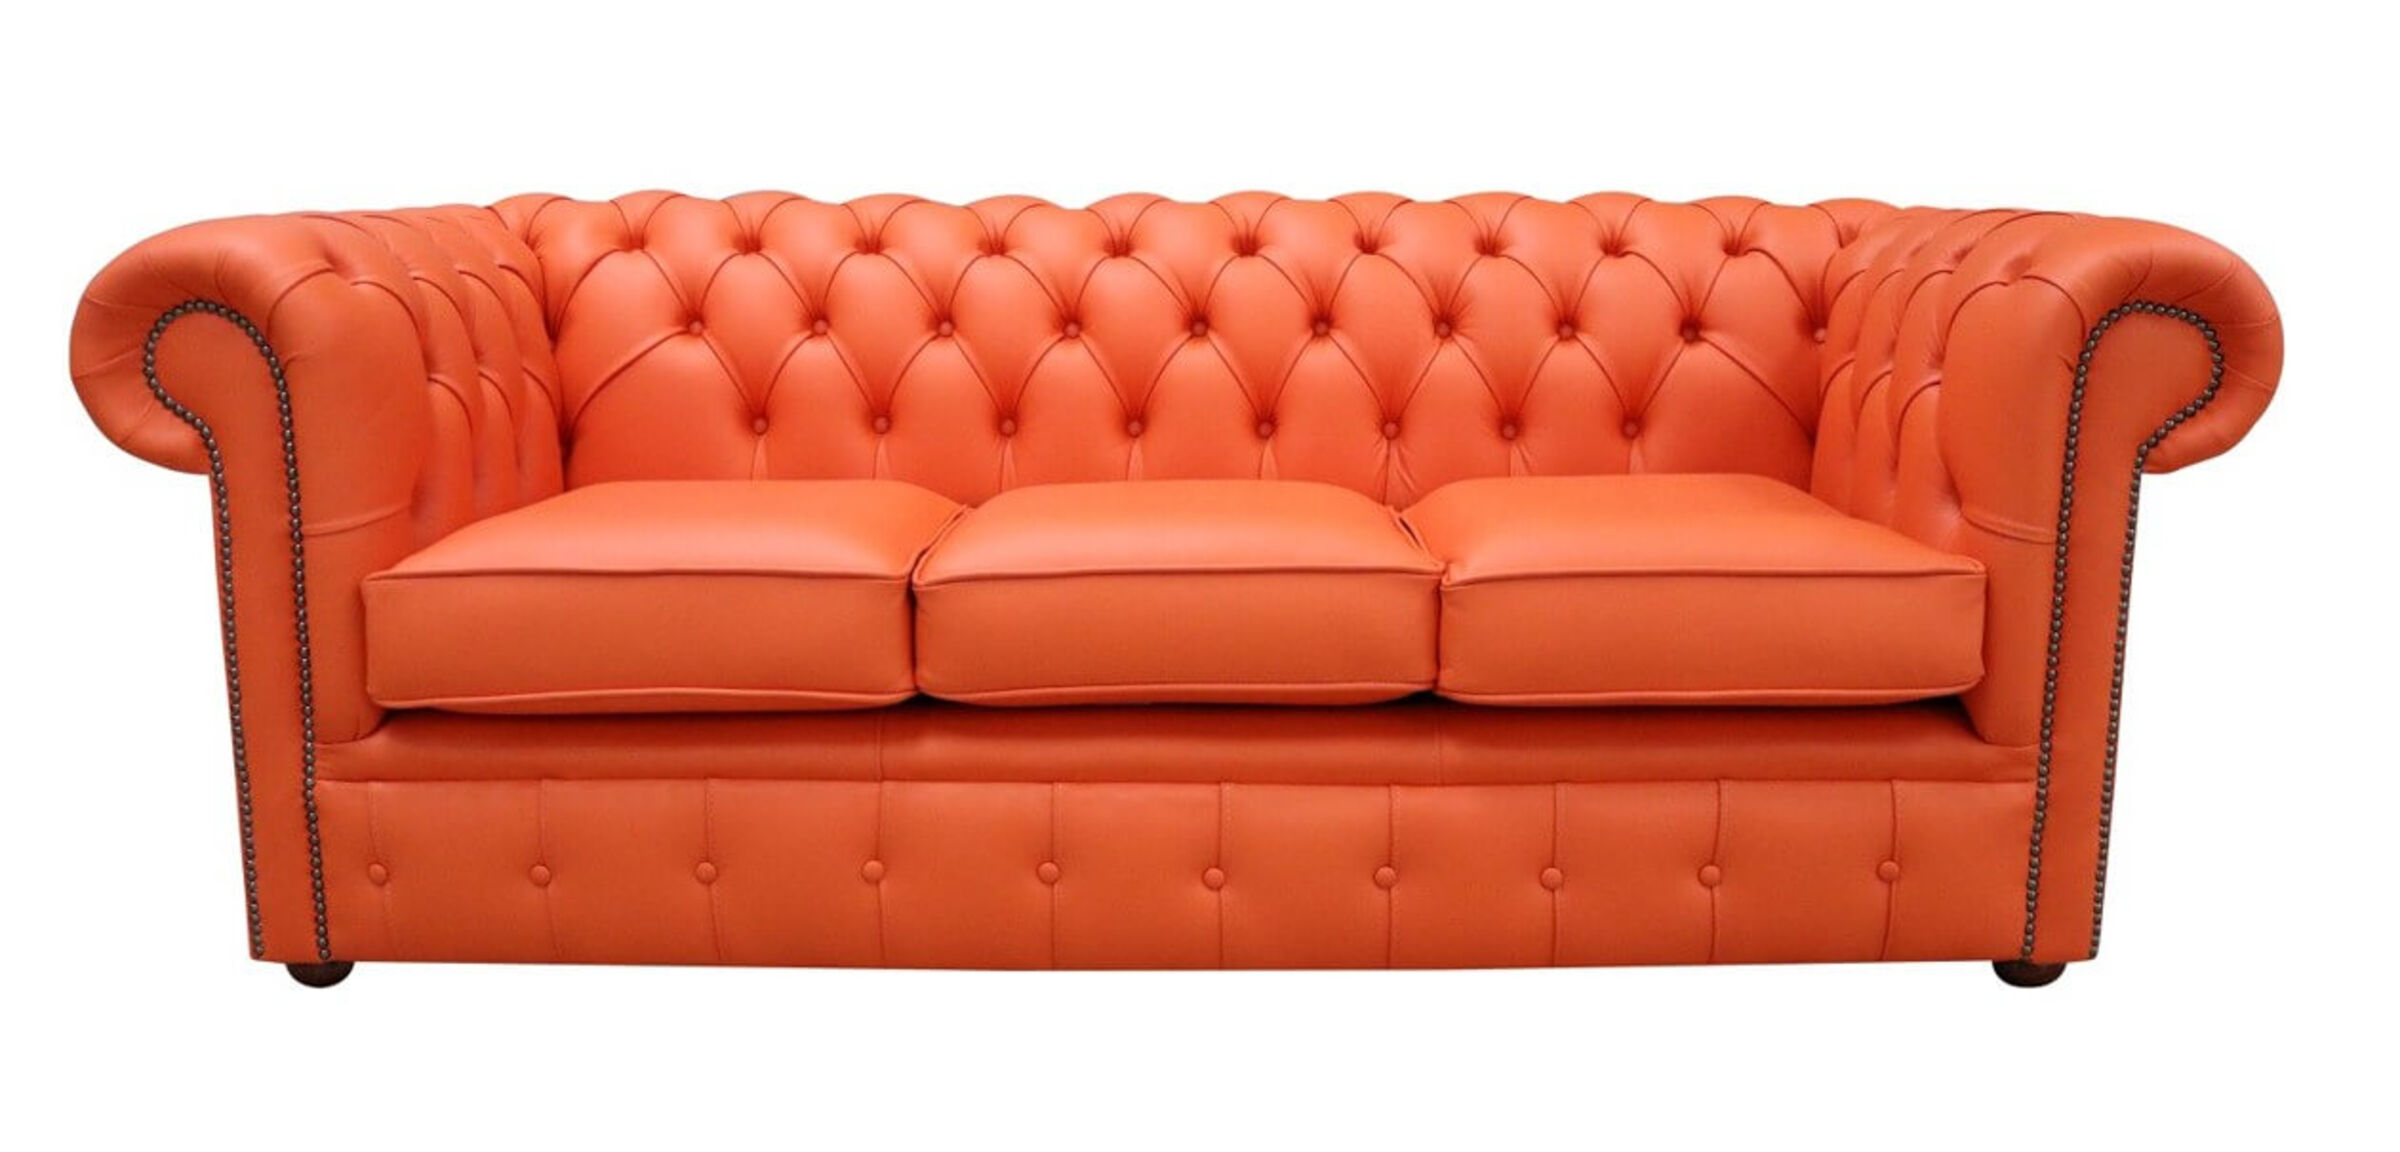 Chesterfield Handmade 3 Seater Sofa, Orange Leather Couches